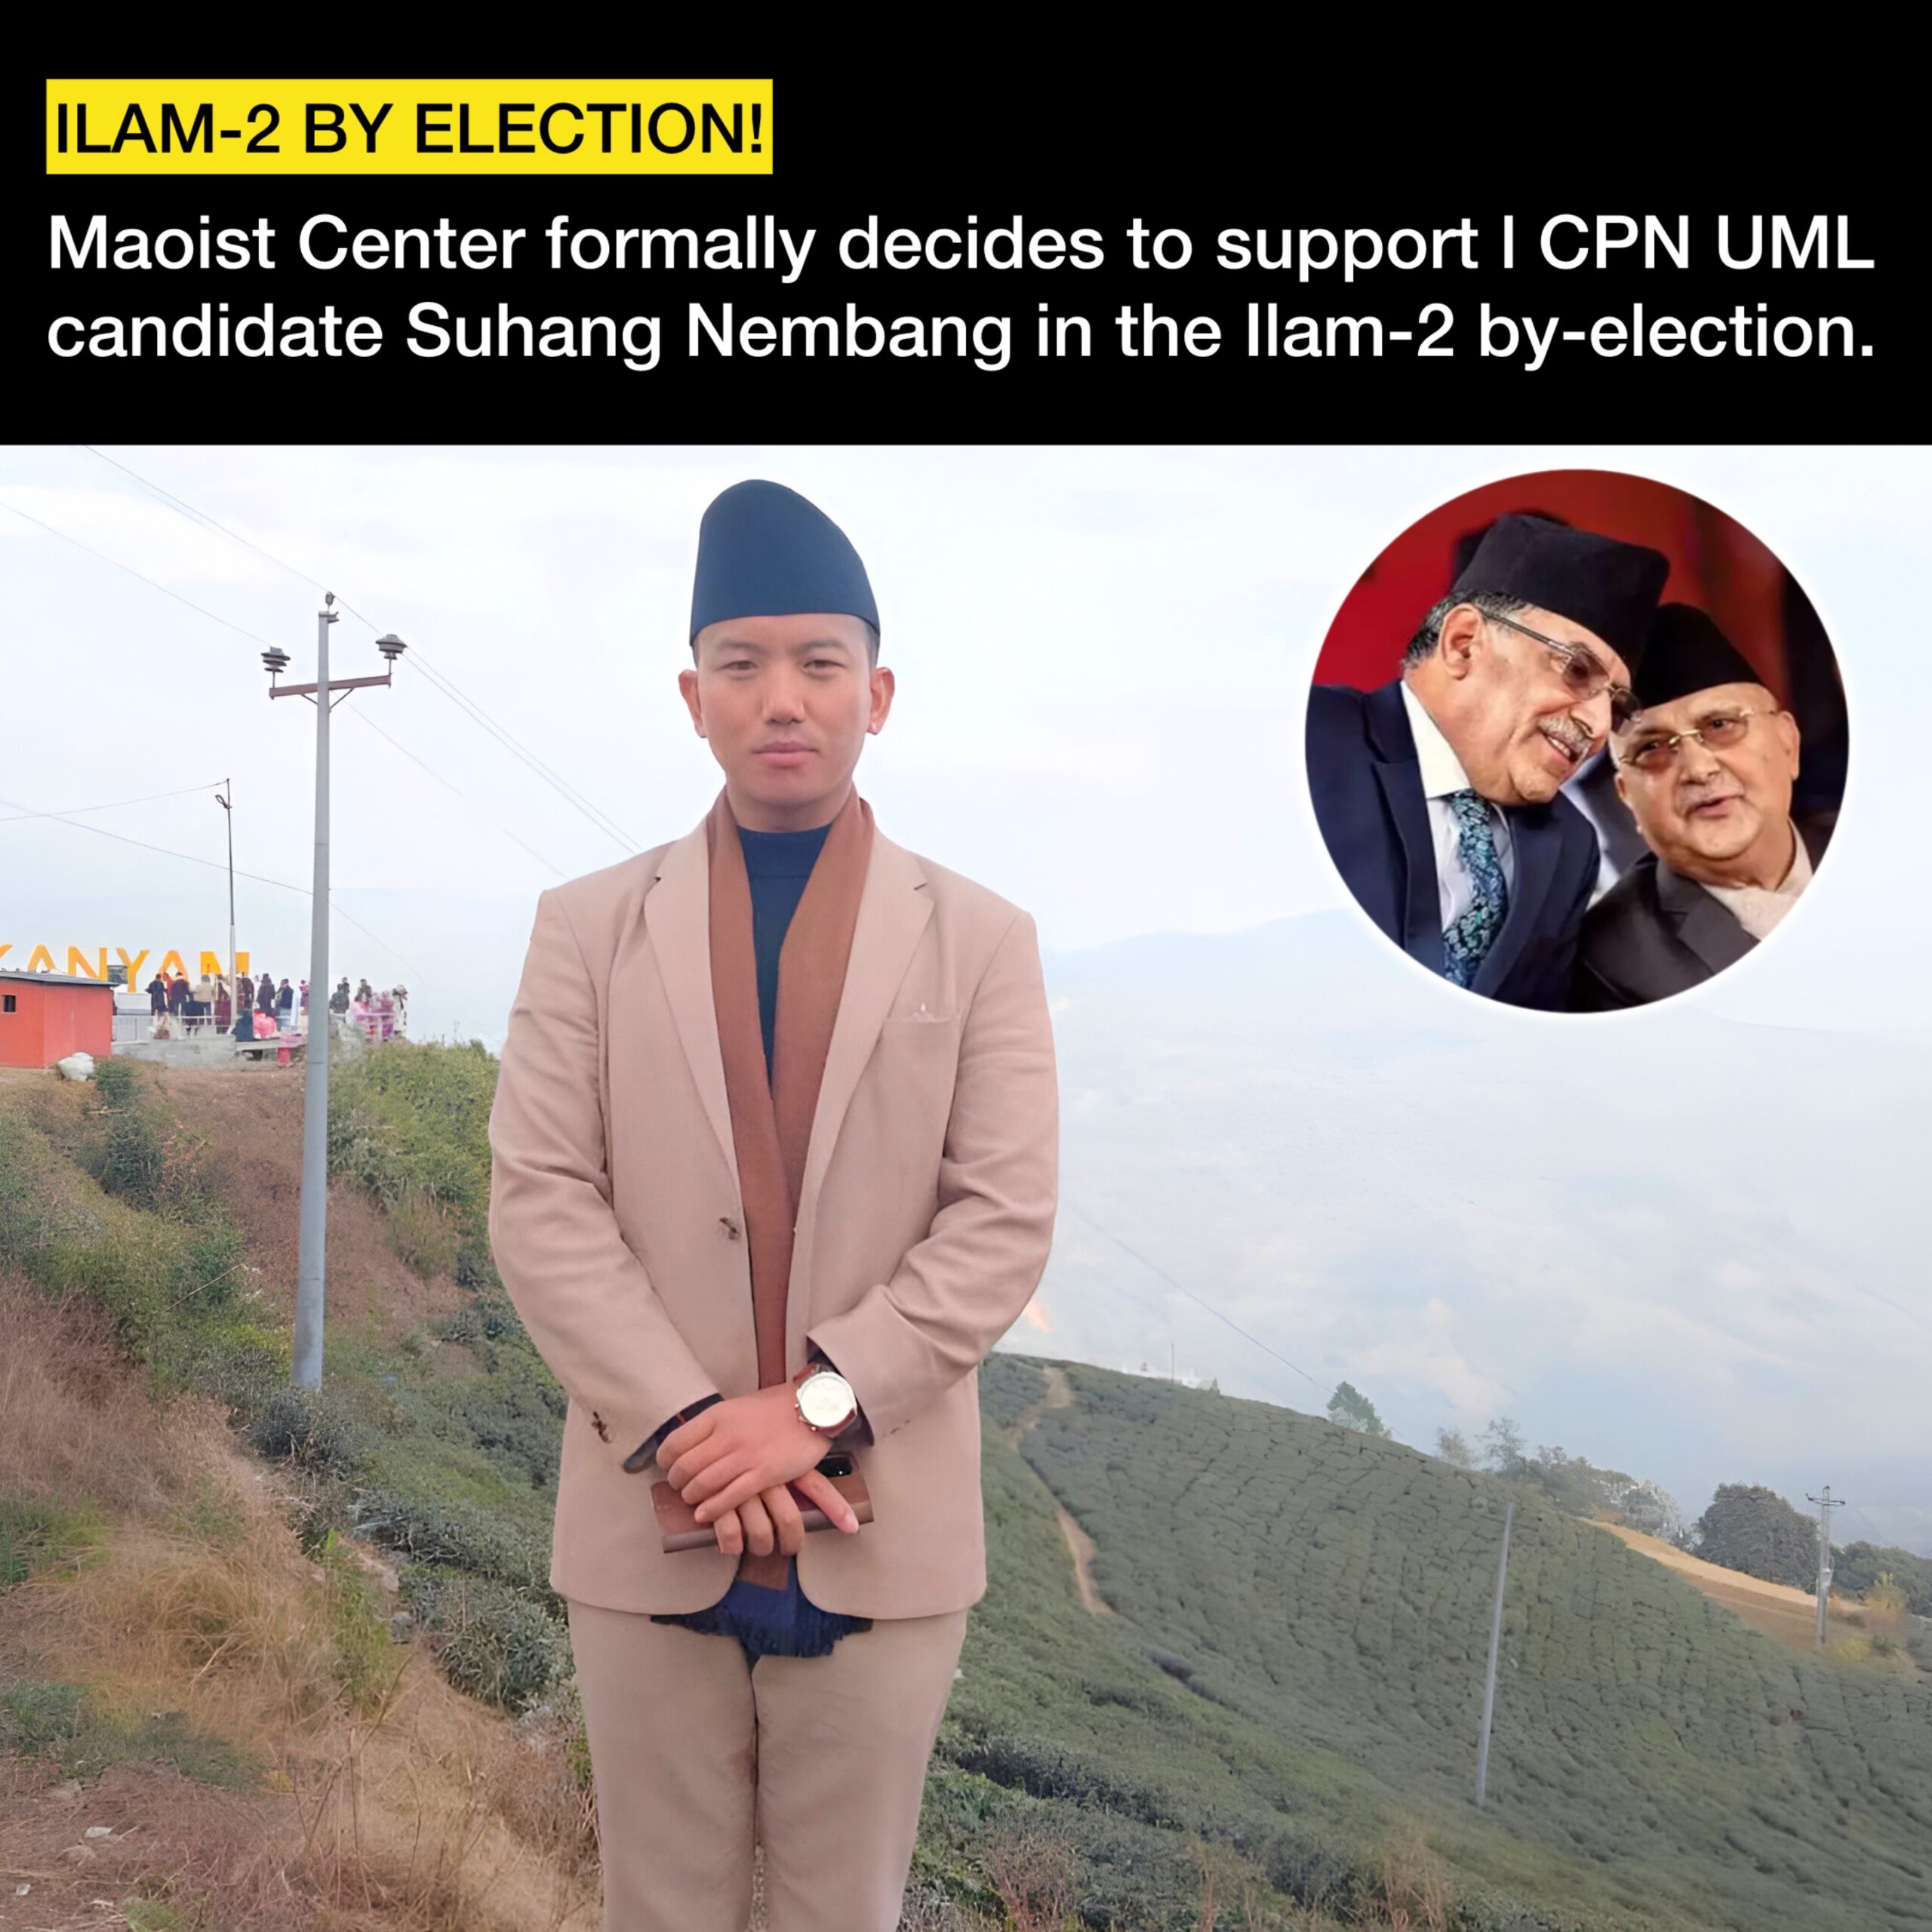 Maoist Center to Support CPN UML’s Suhang Nembang in Ilam-2 By-Election